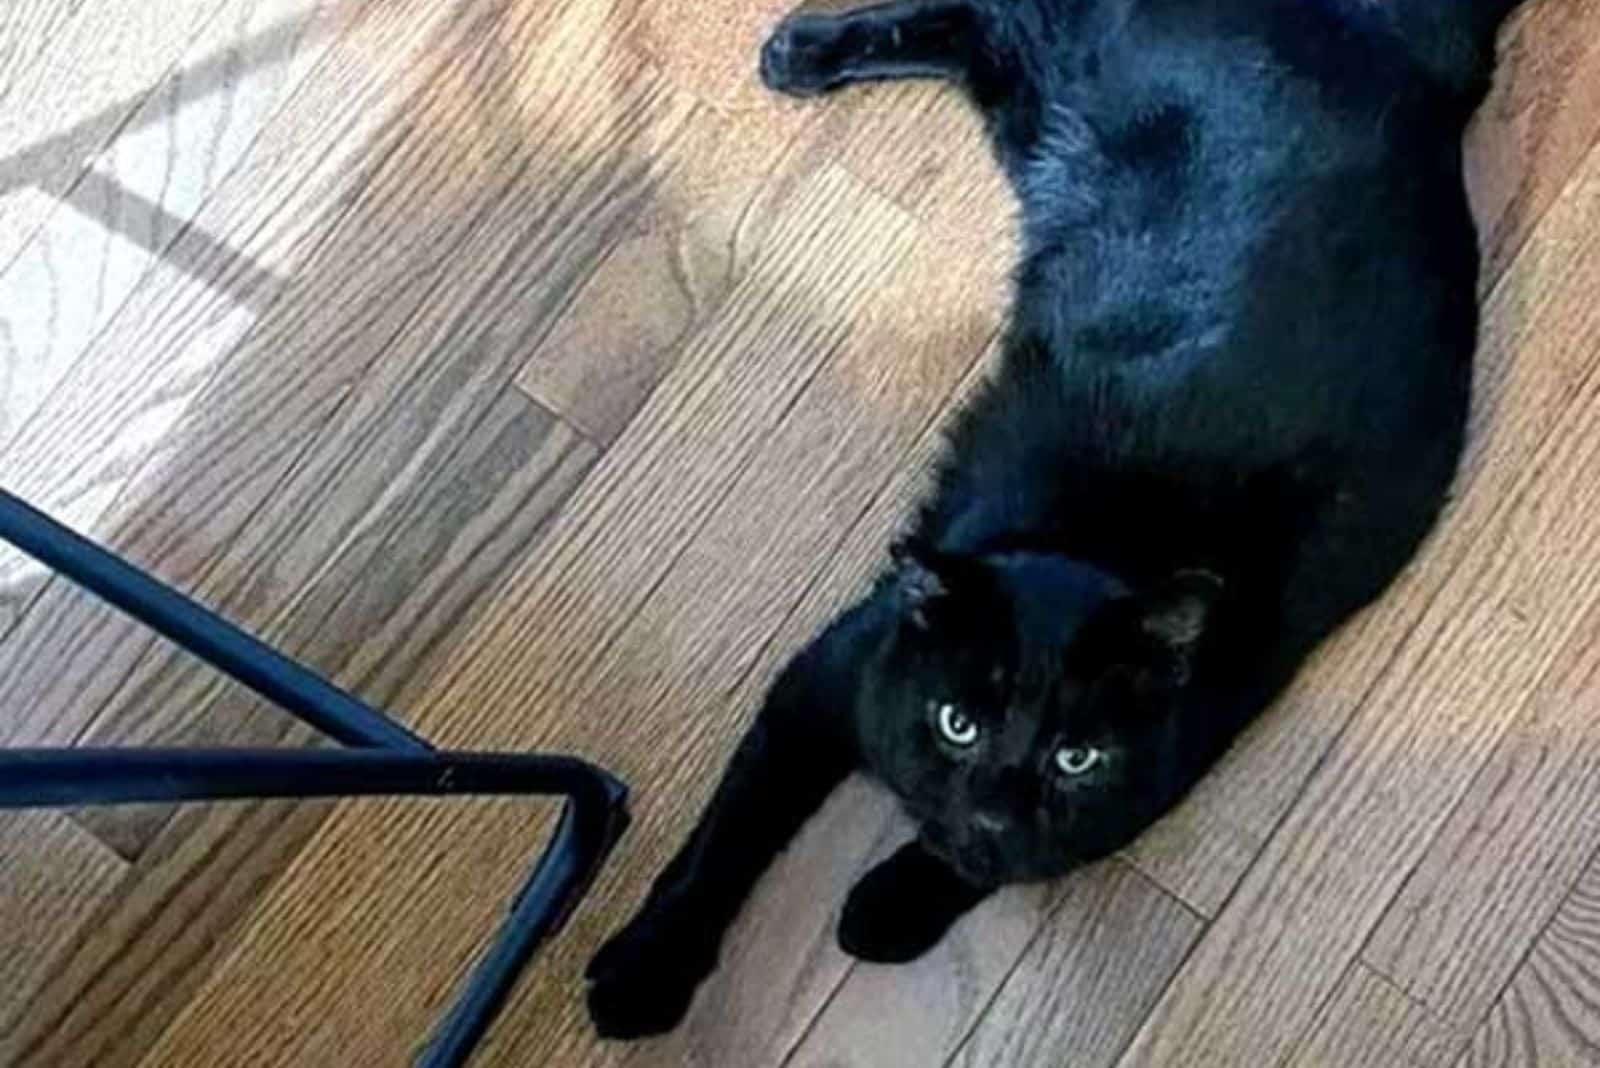 a black cat is lying on the laminate with its head up looking at the camera